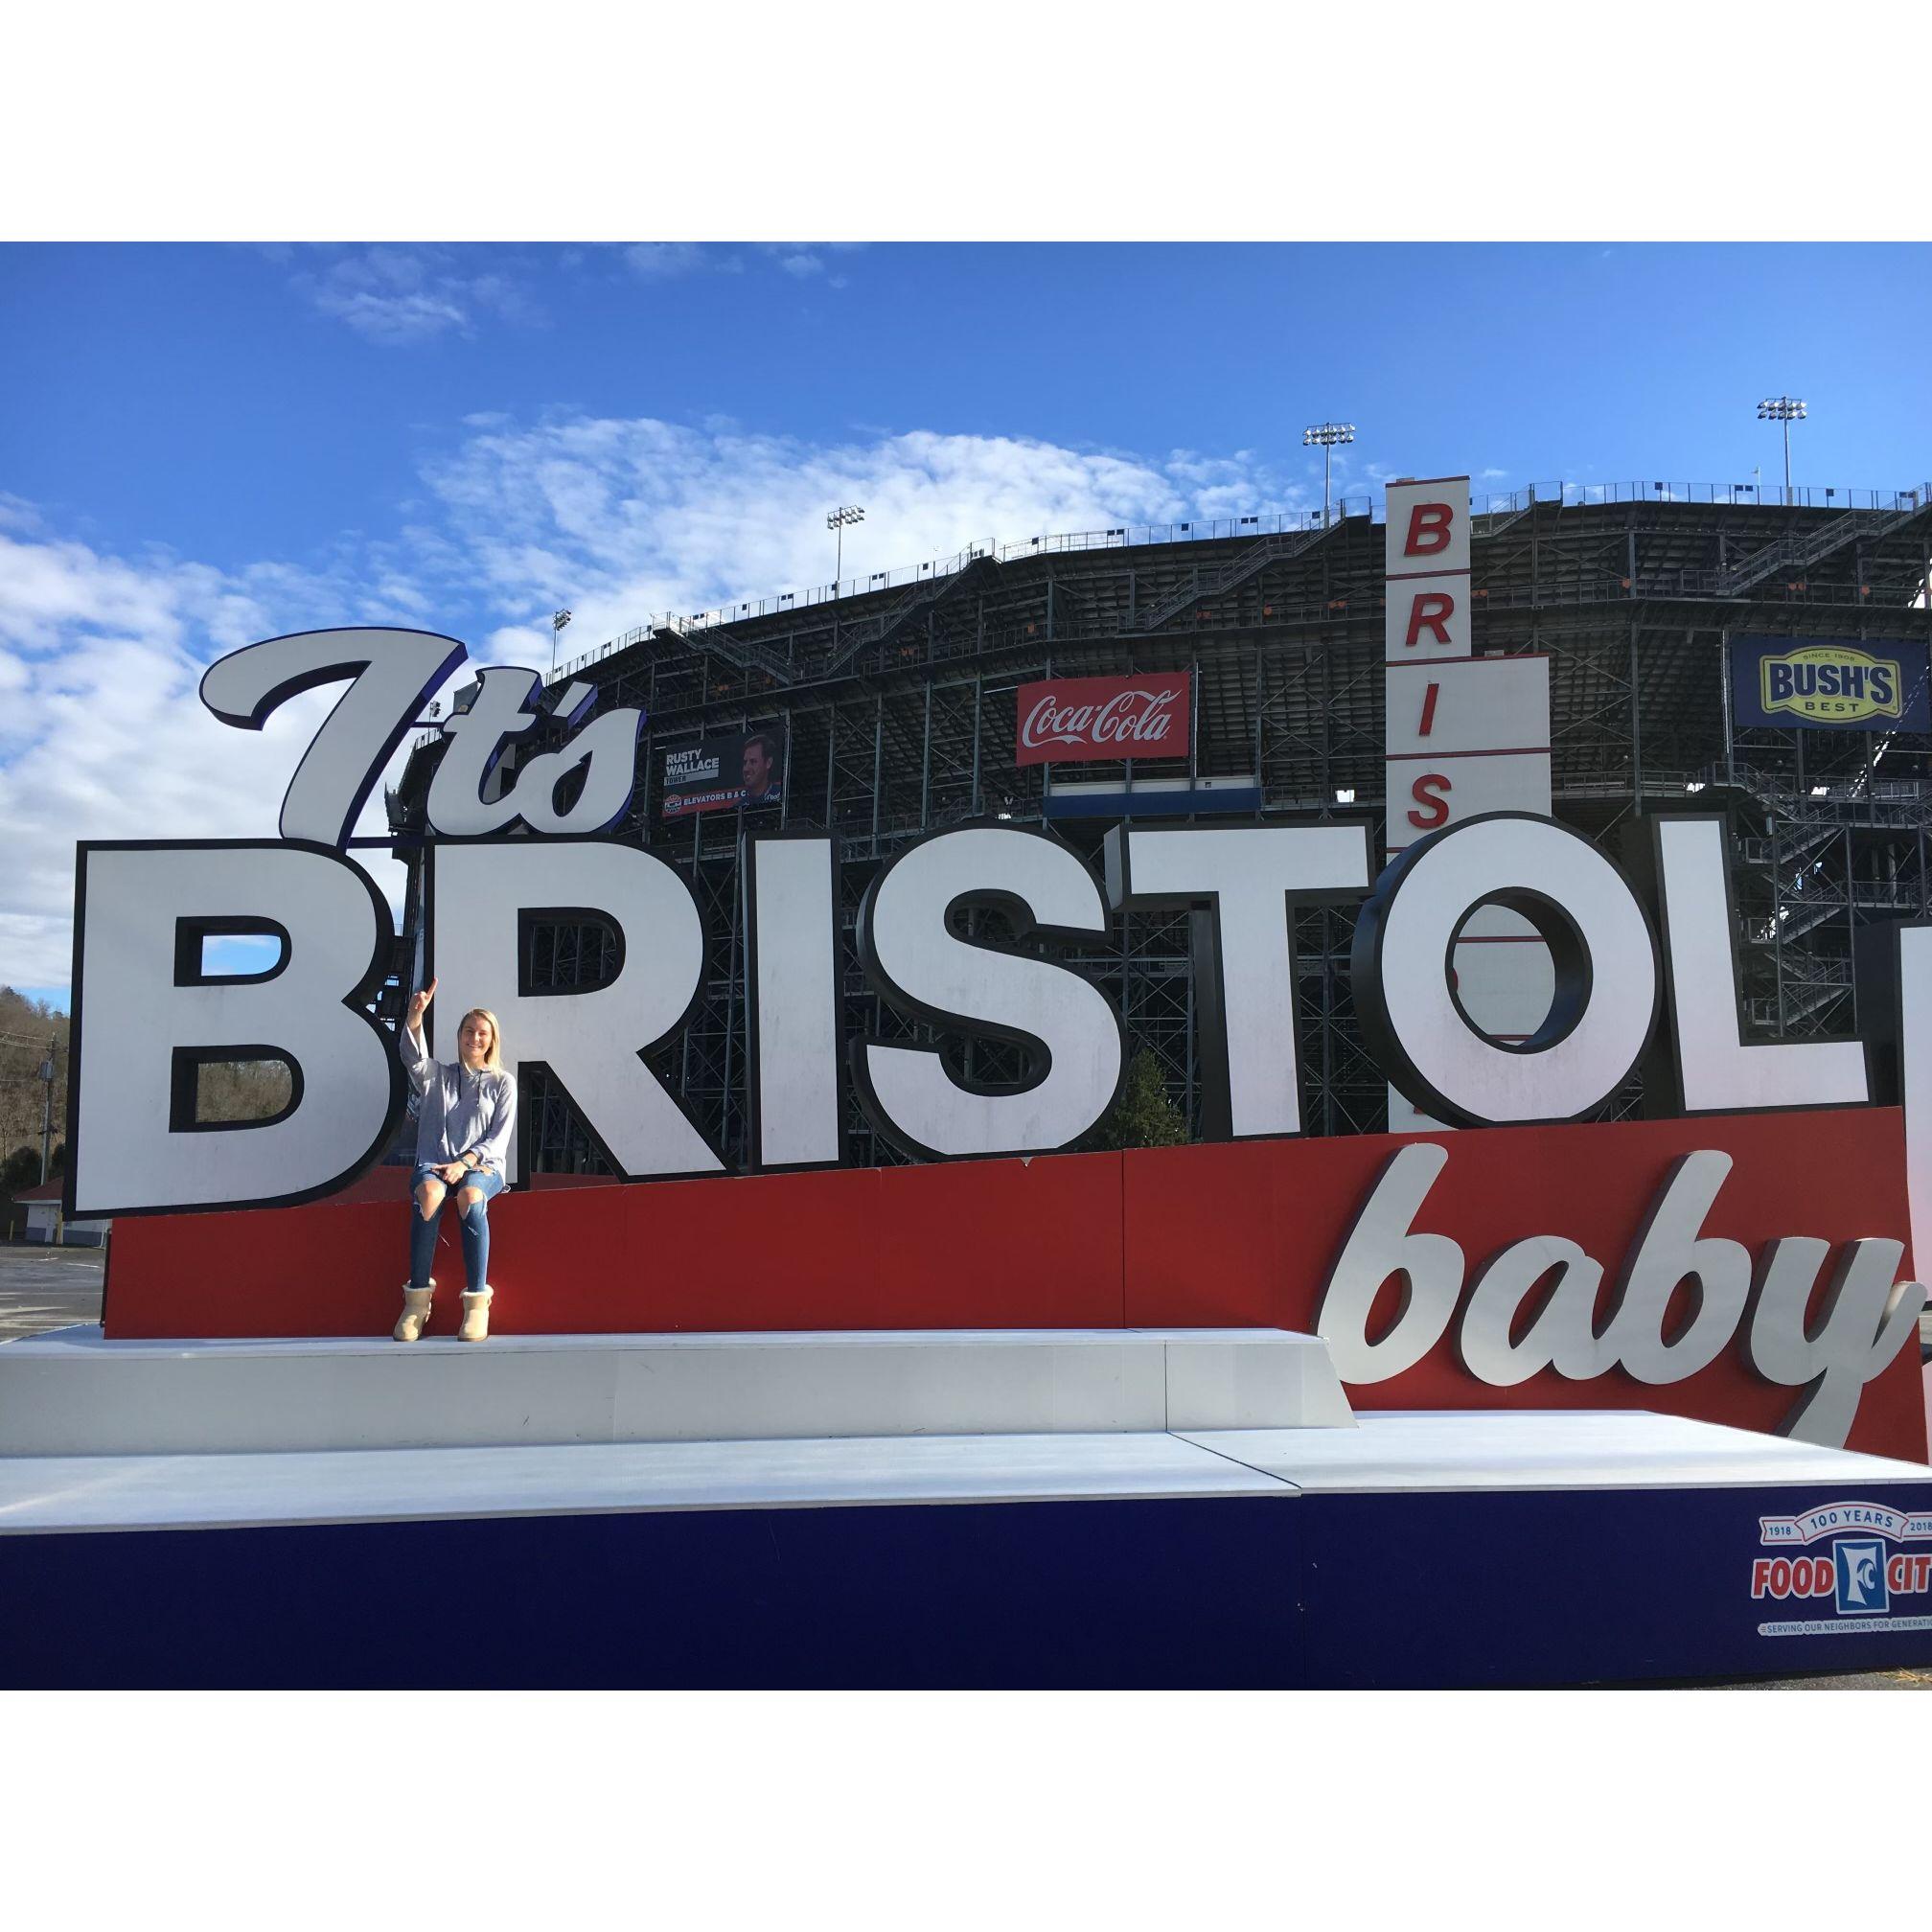 Emily beats out Dale Jr. to take 1st place at Bristol Speedway